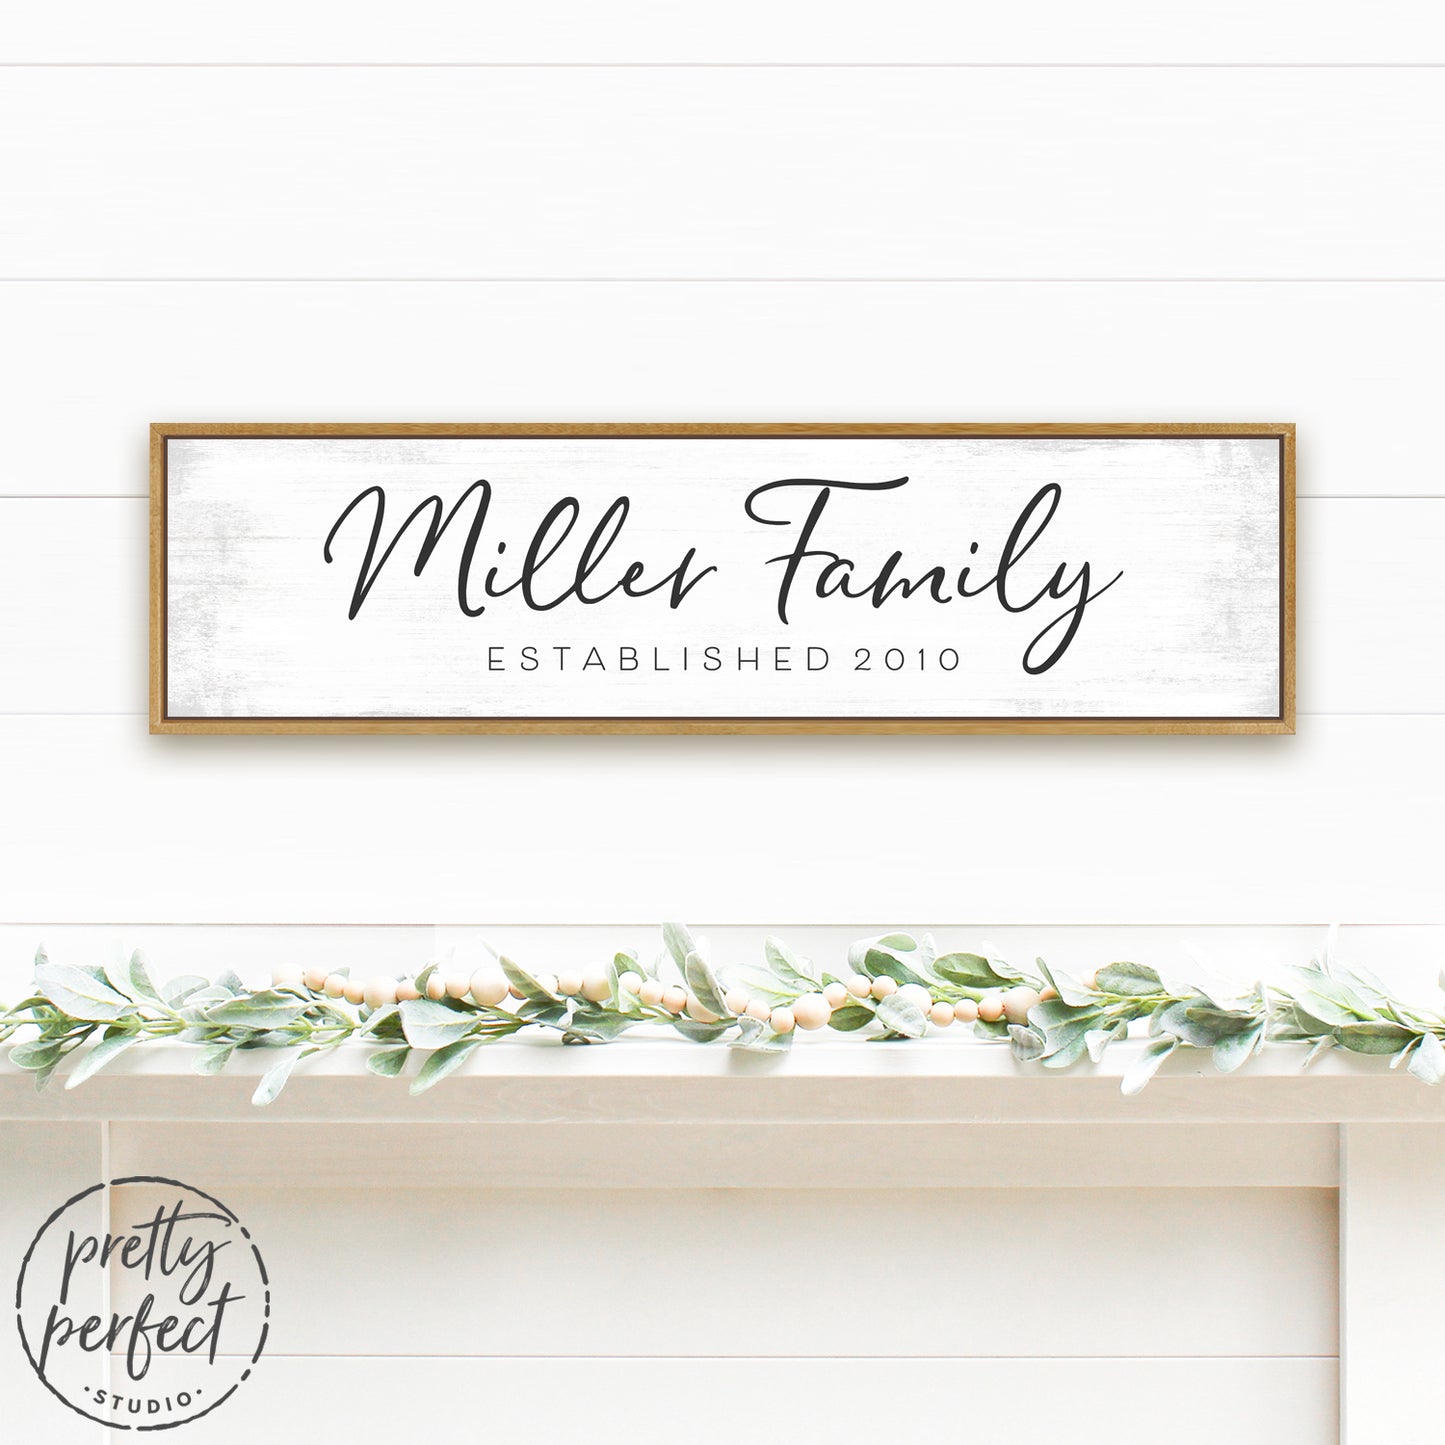 Custom Family Name Sign with Established Date Above Shelf in Living Room - Pretty Perfect Studio